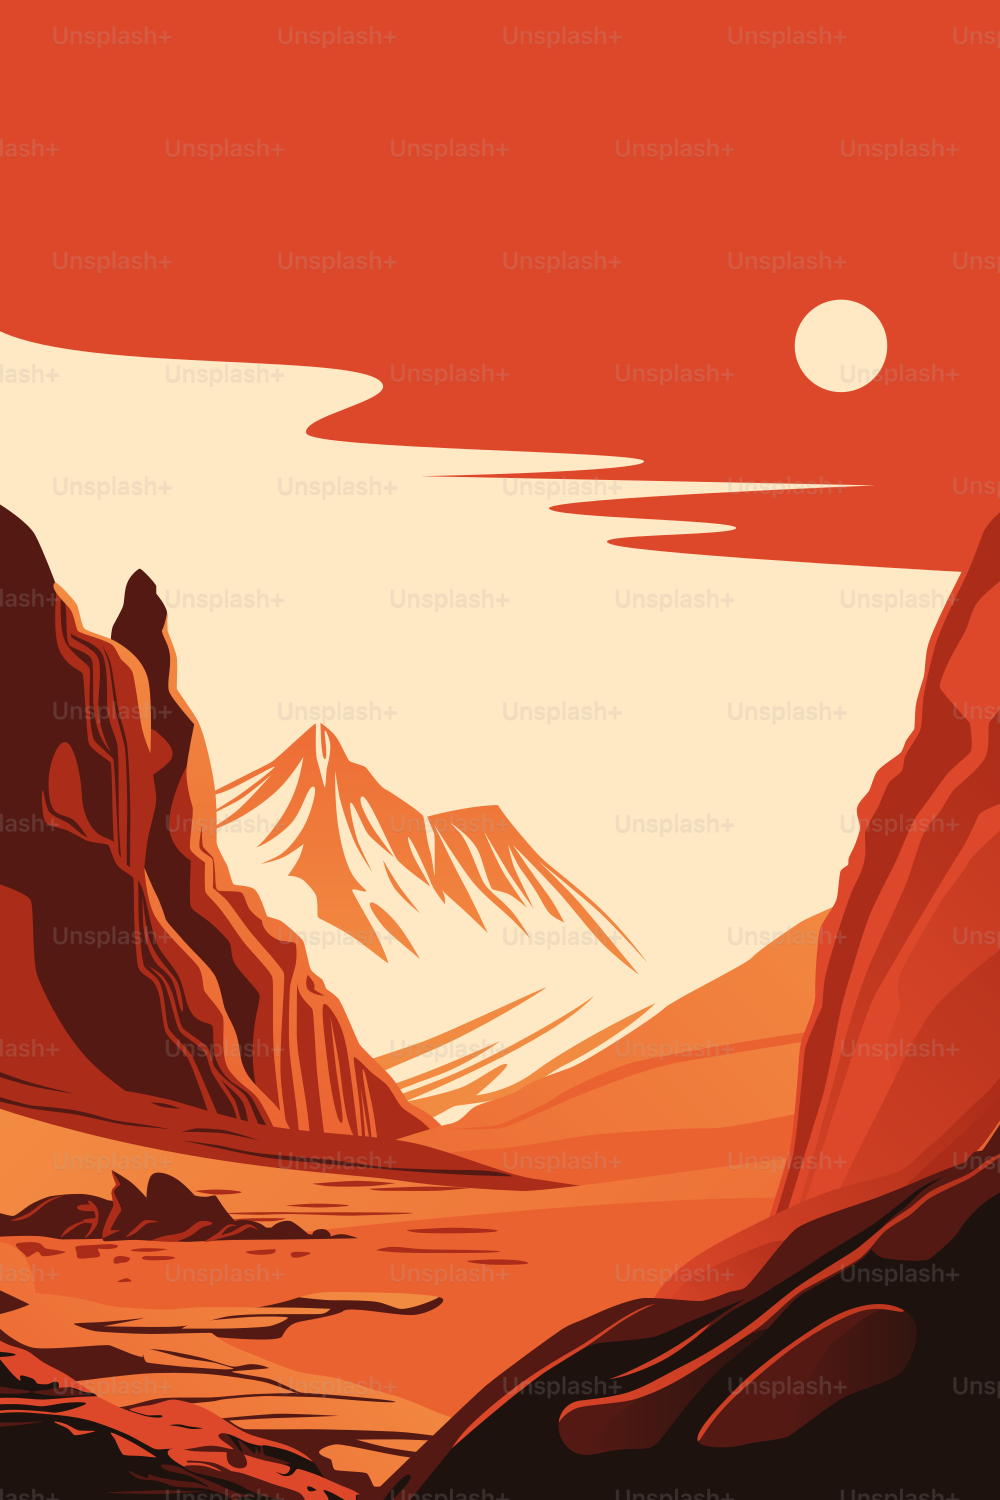 Mars Poster. Human Solar System Exploration. Surface of the Red Planet. Distant Sun in the Skies.